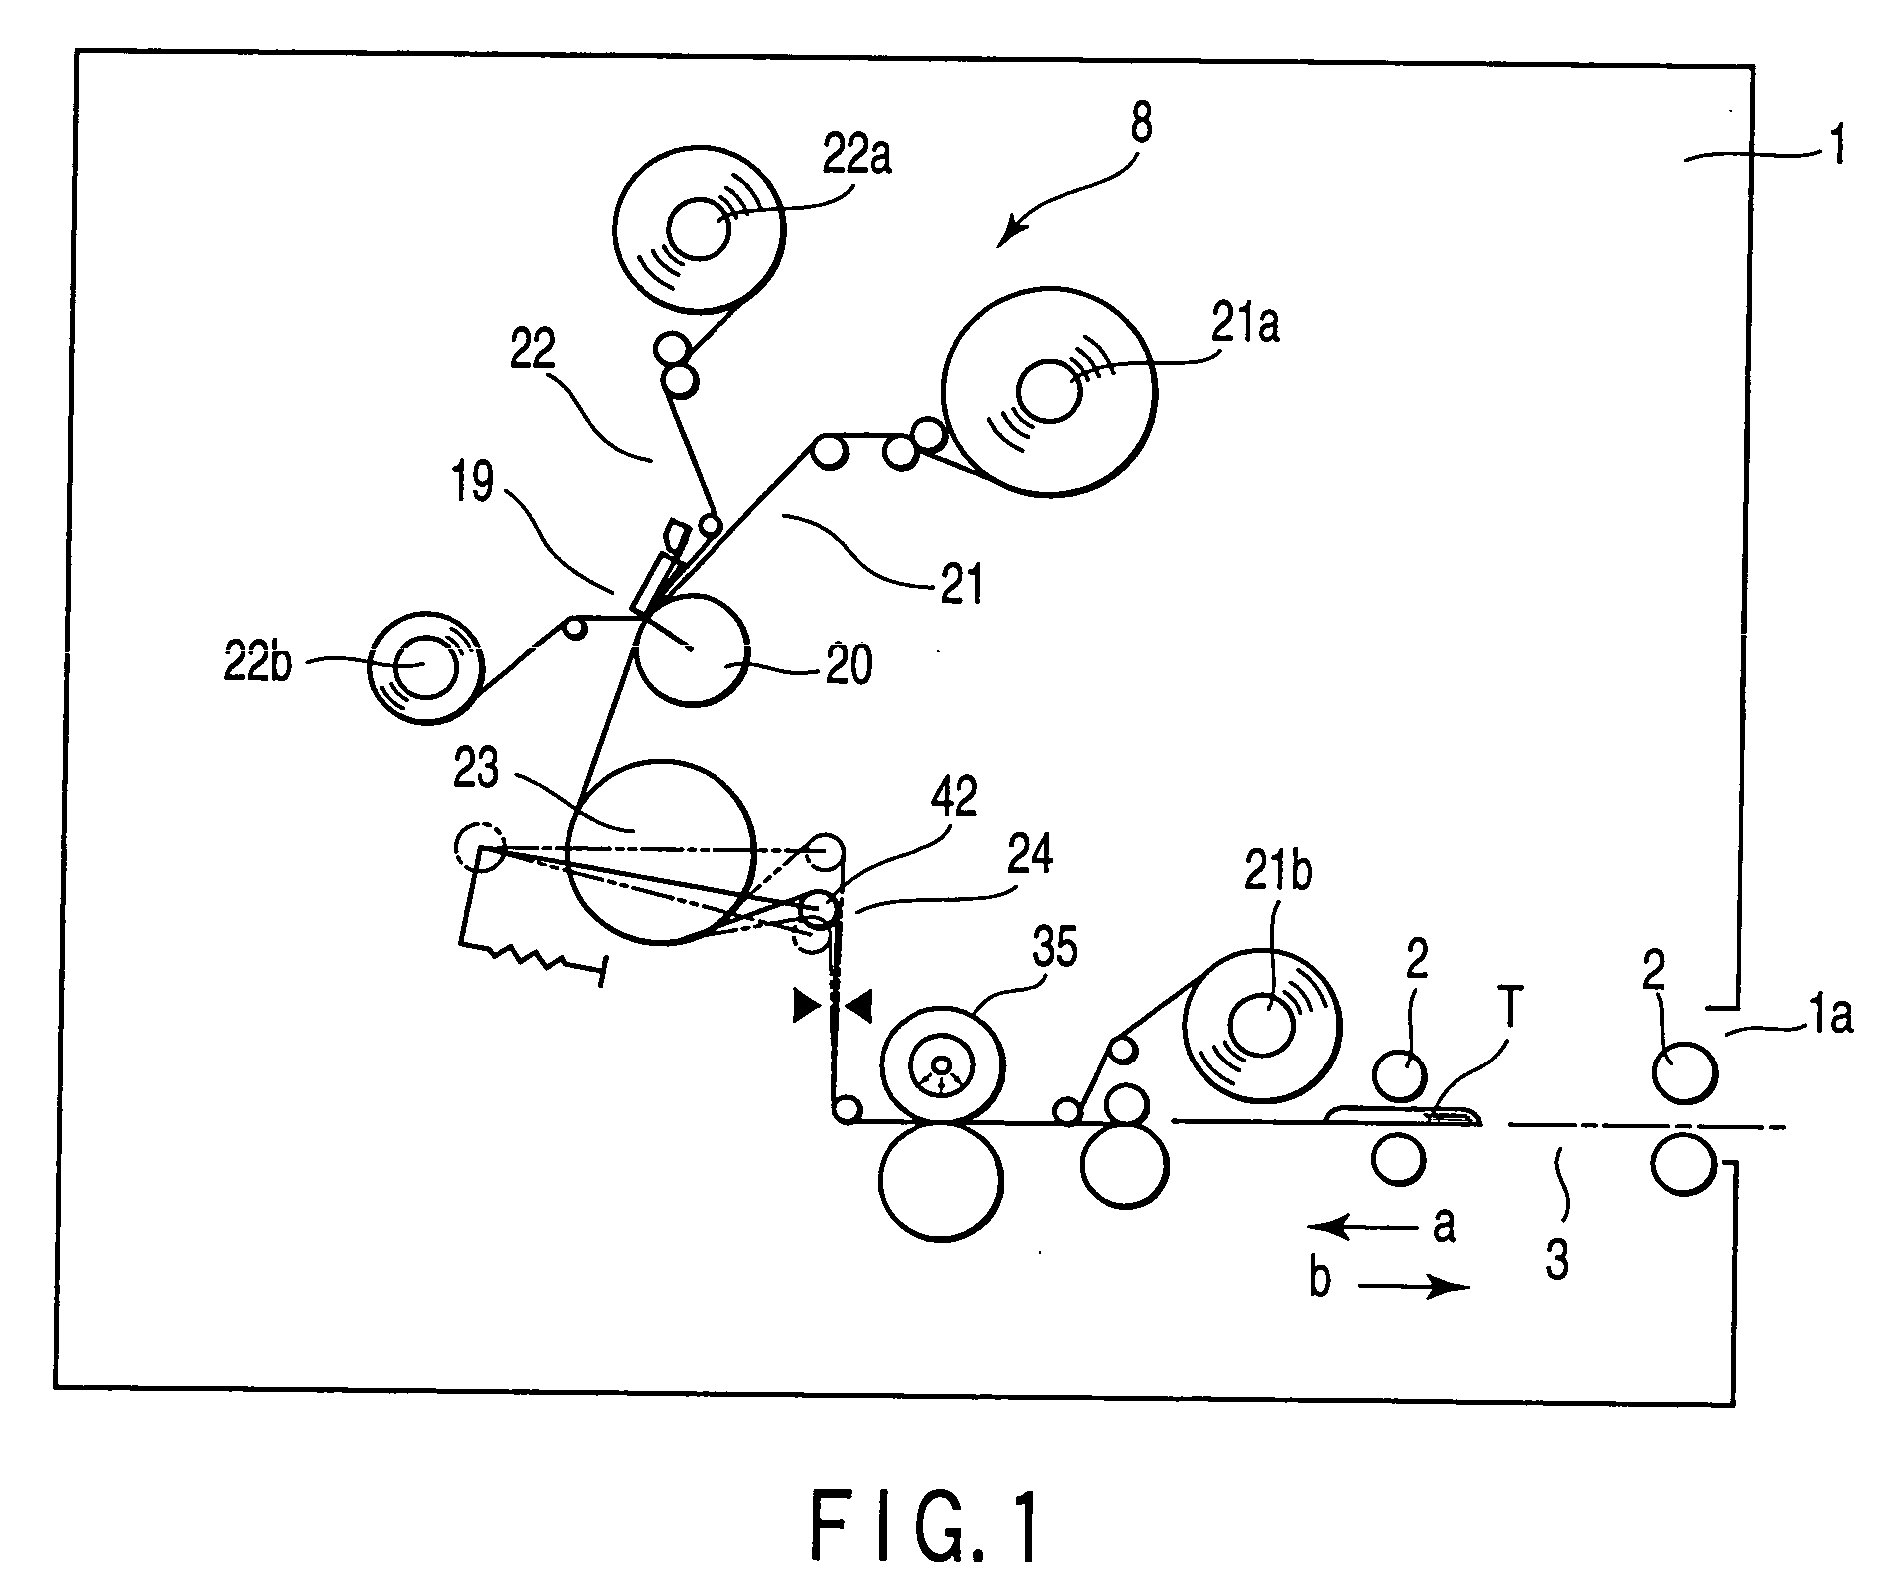 Printing apparatus and method for passbooks